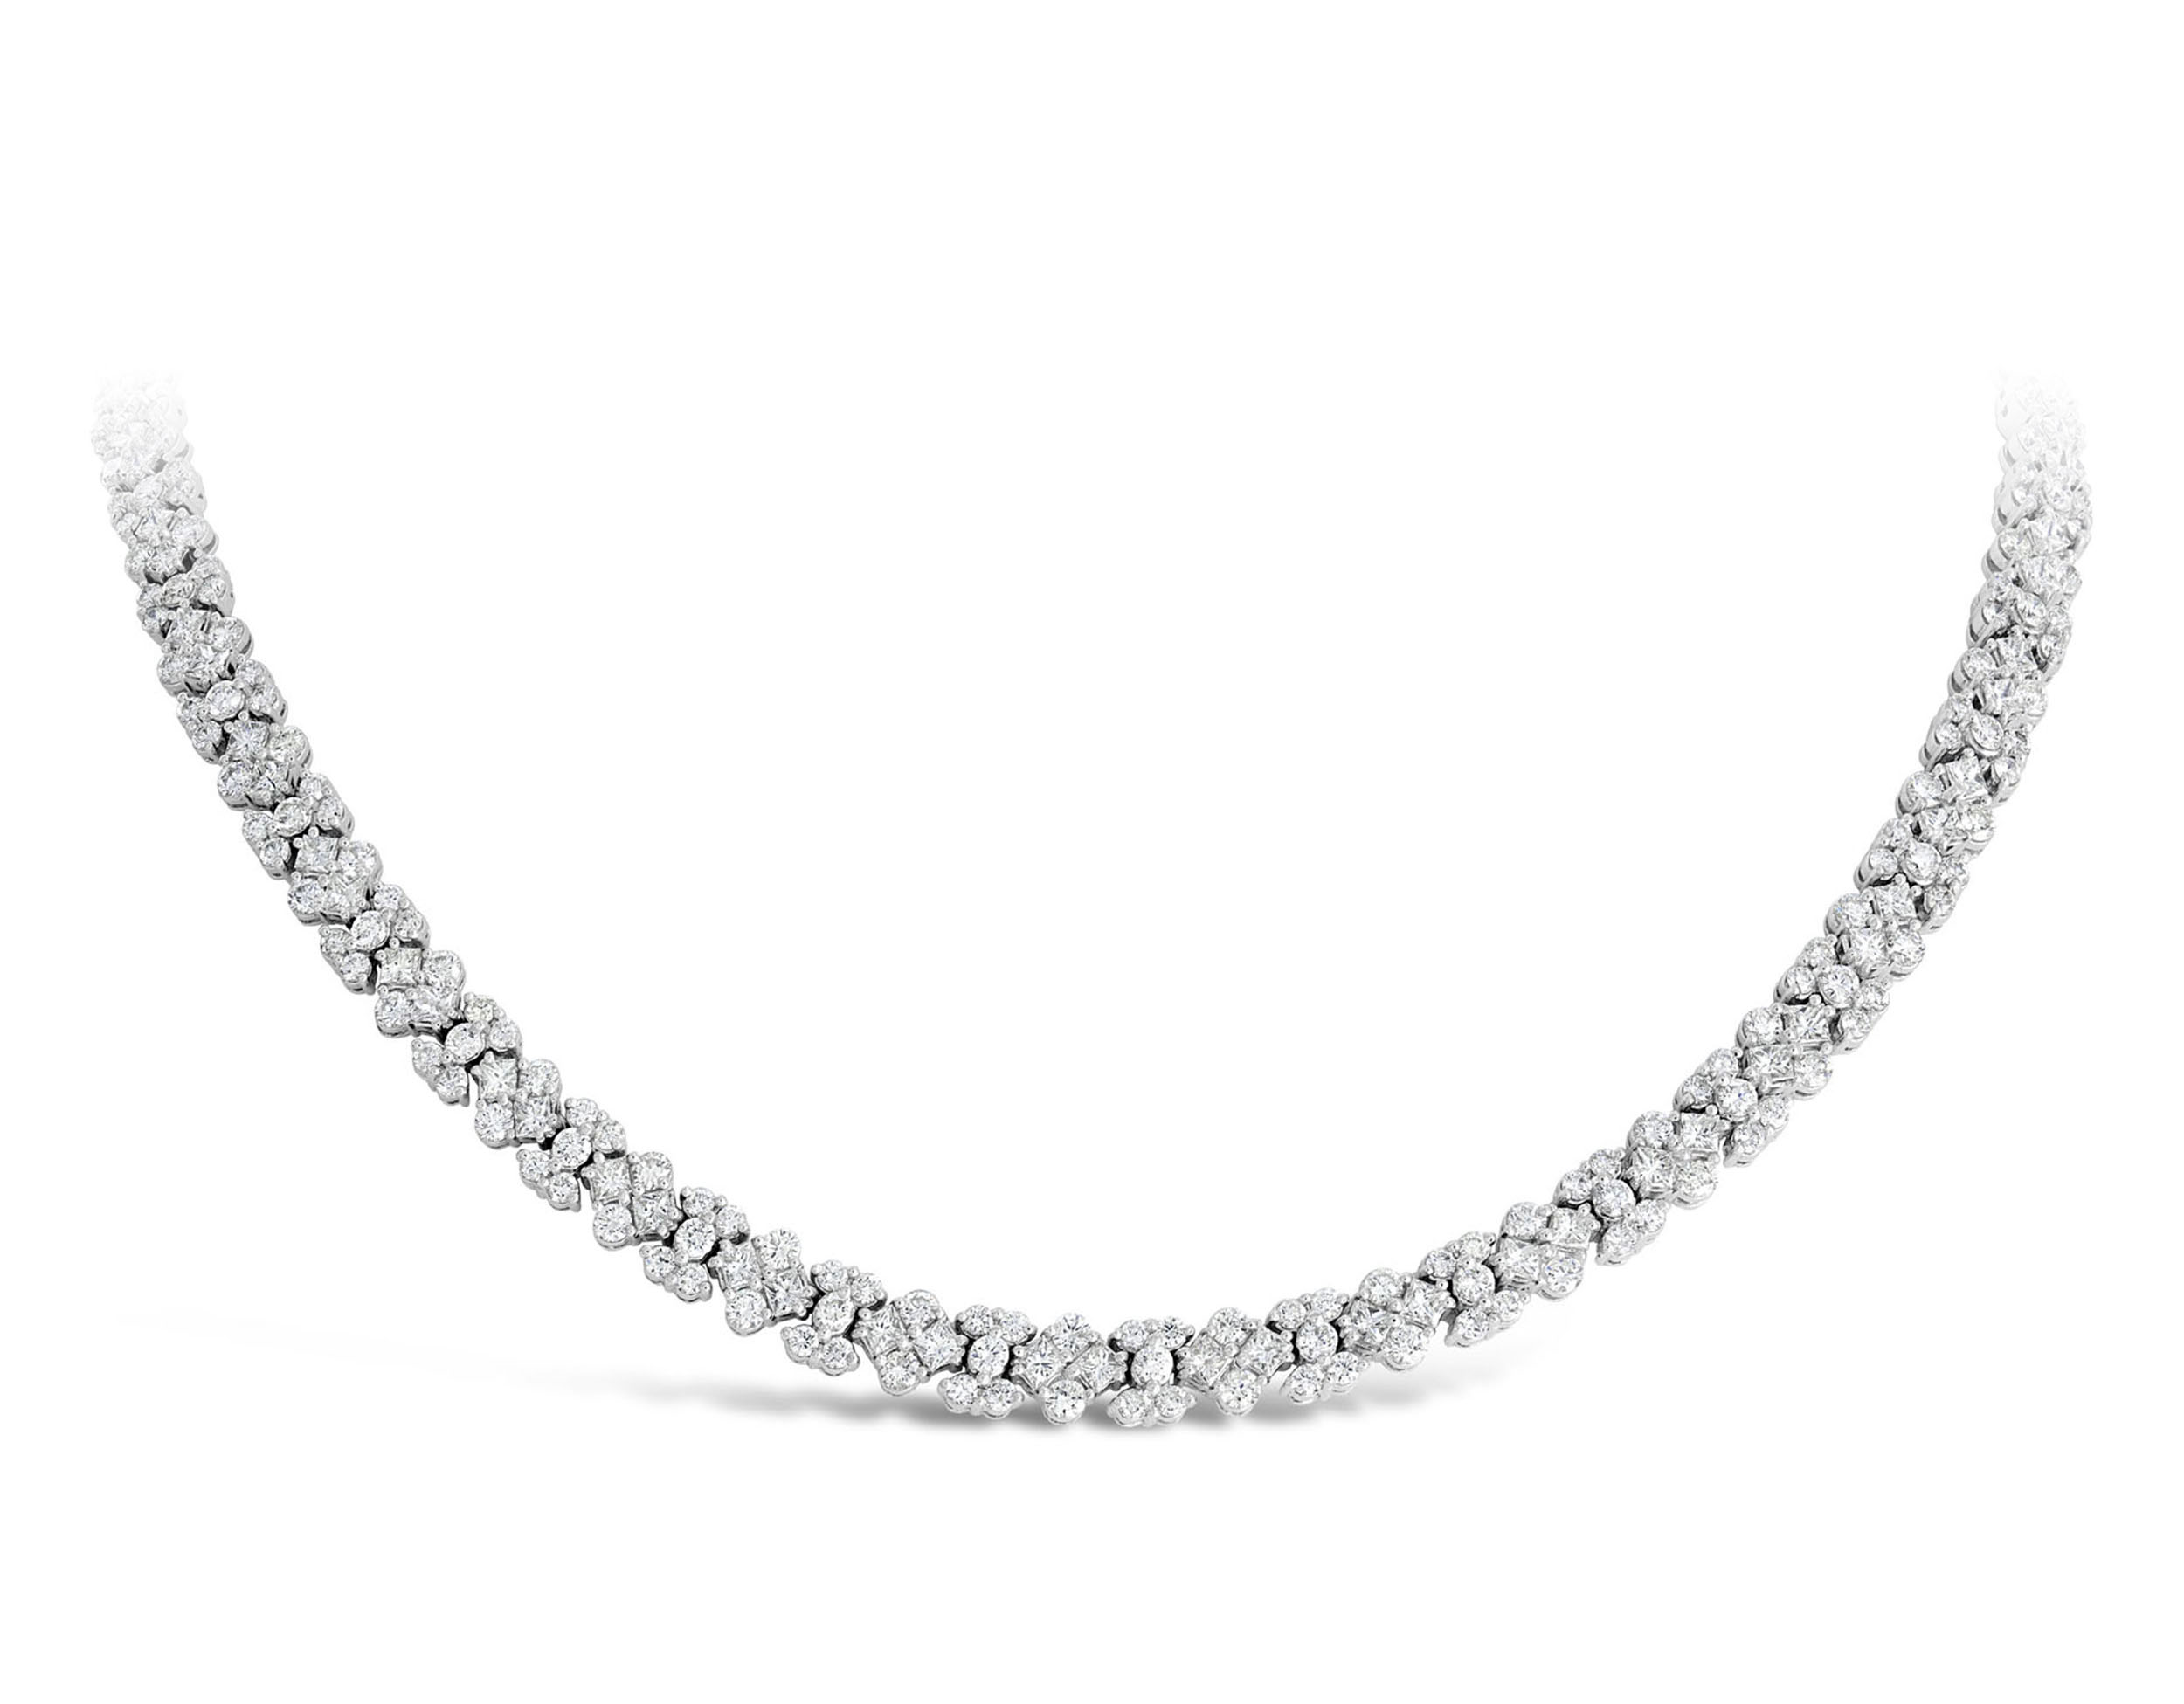 London Collection White Gold Pave Diamond Necklace